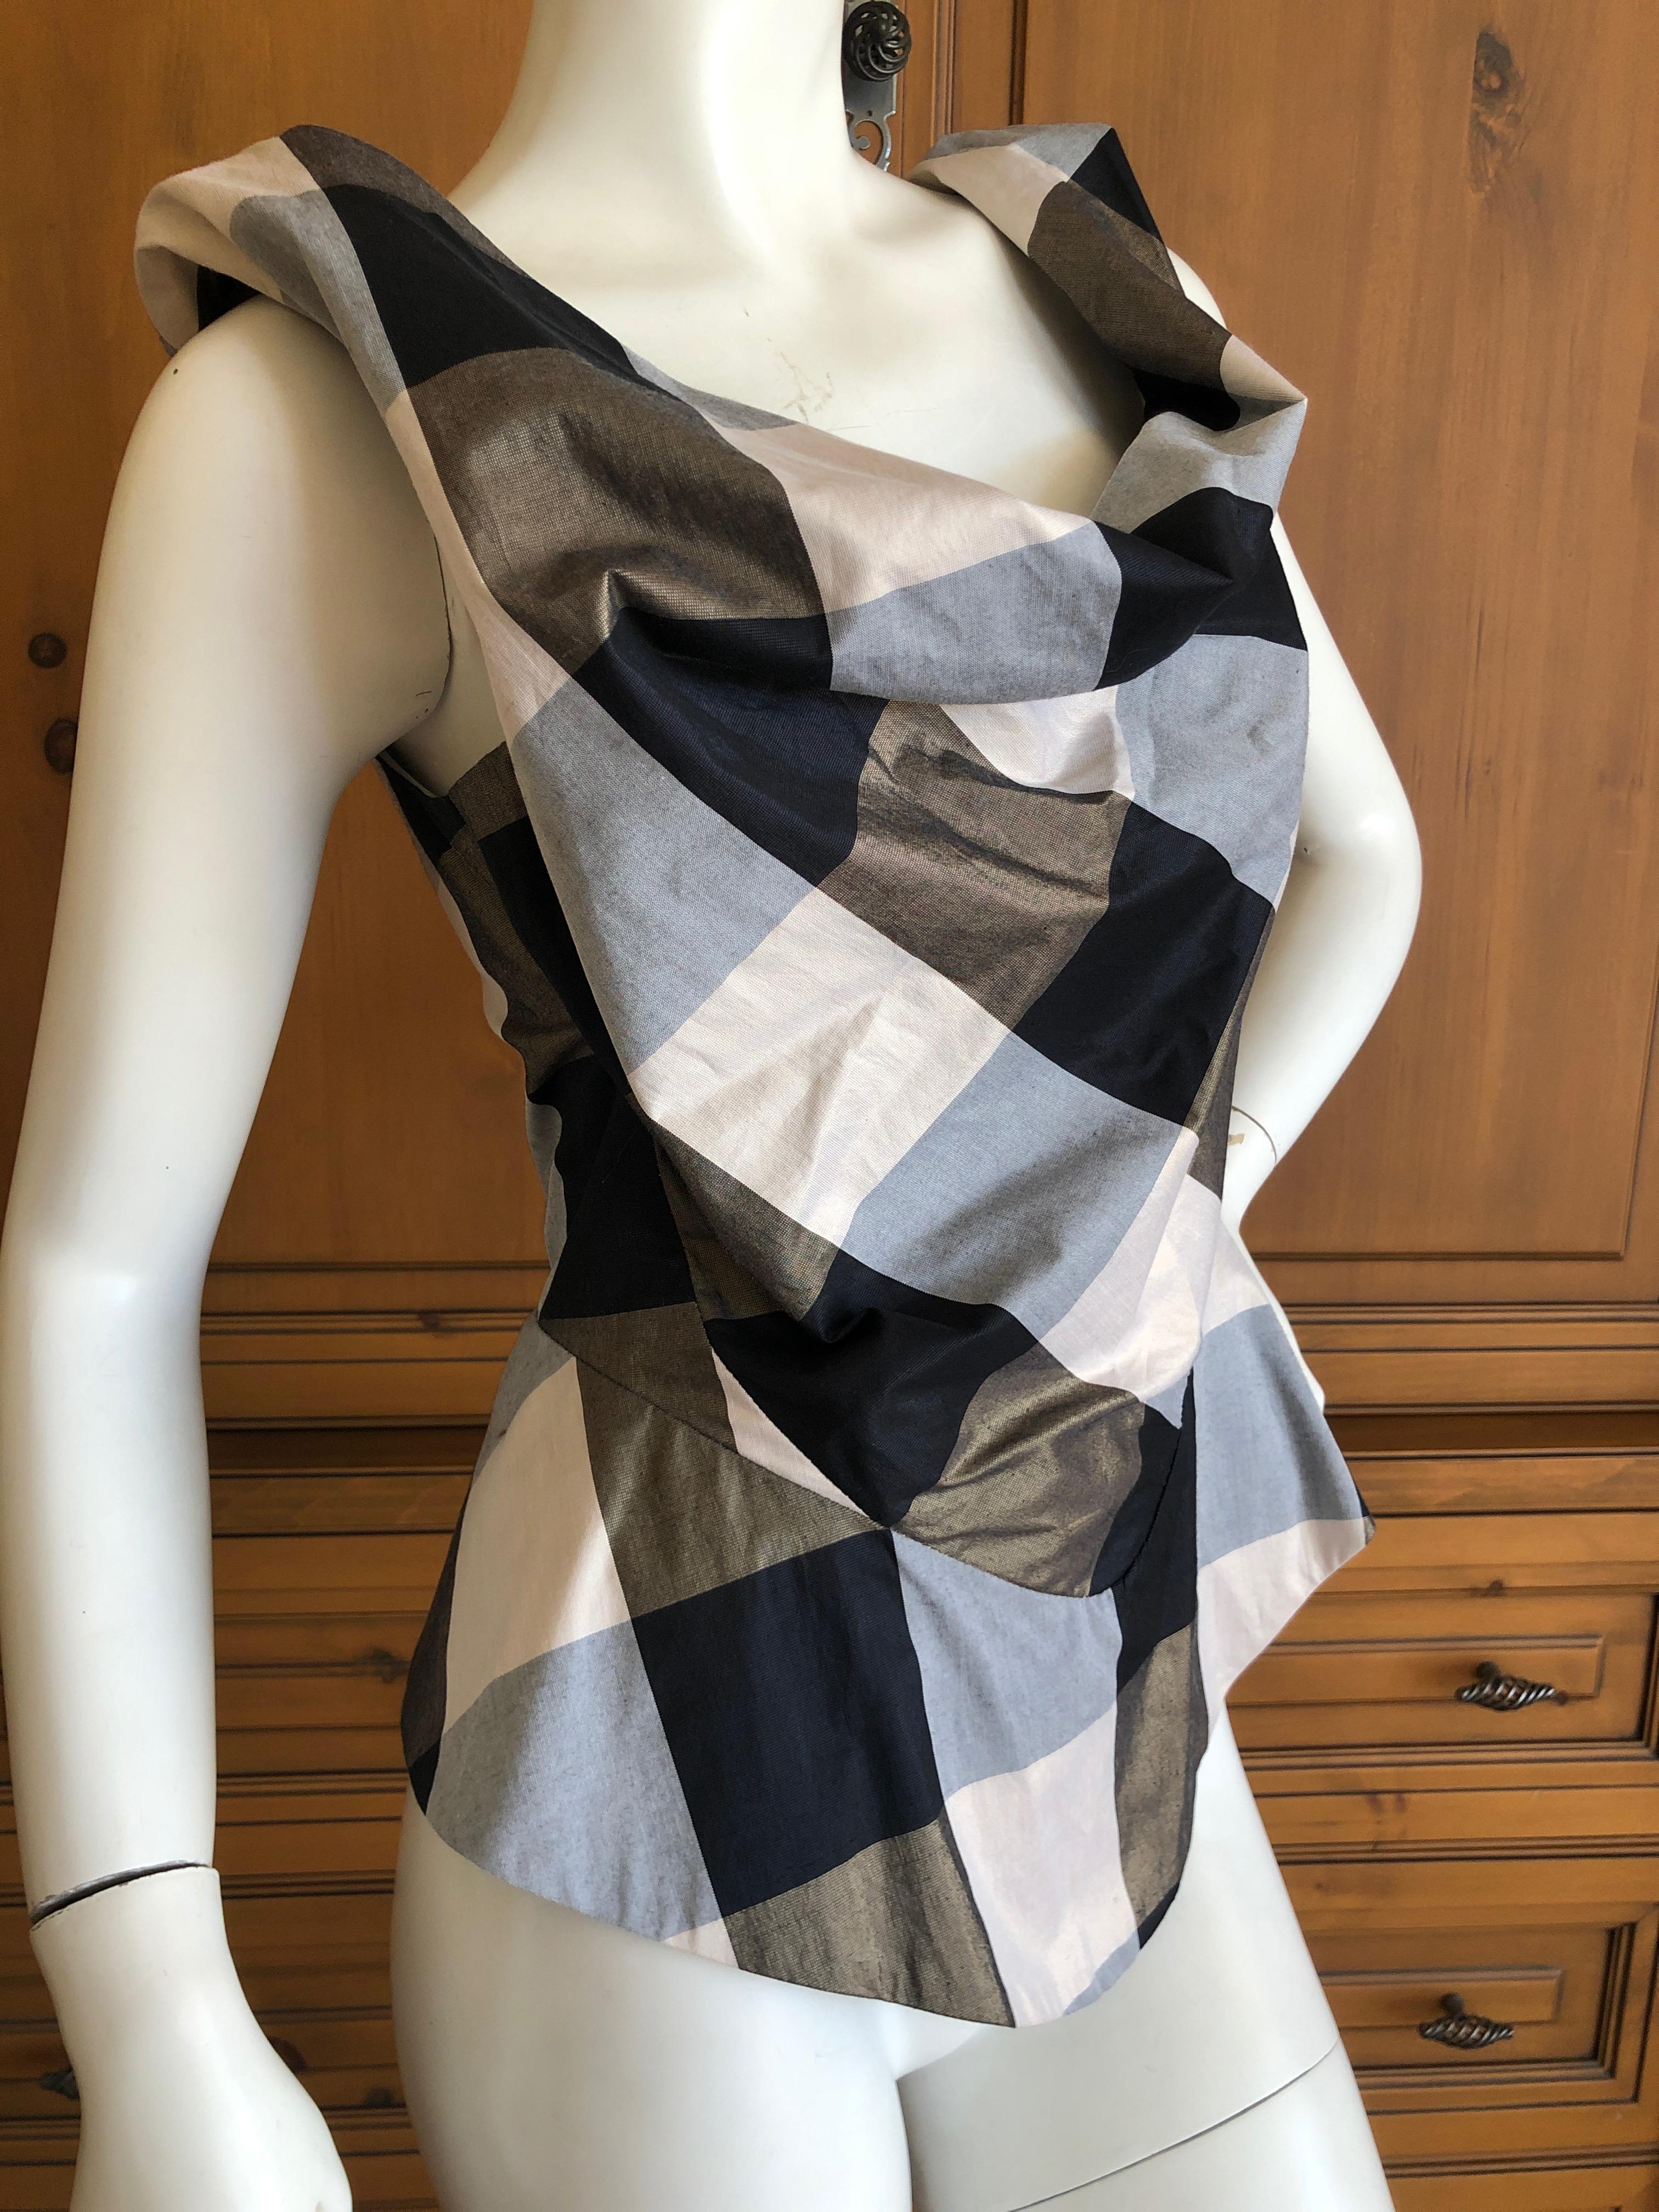 Vivienne Westwood Anglomania Gray Plaid Top
Size 42
Bust 38